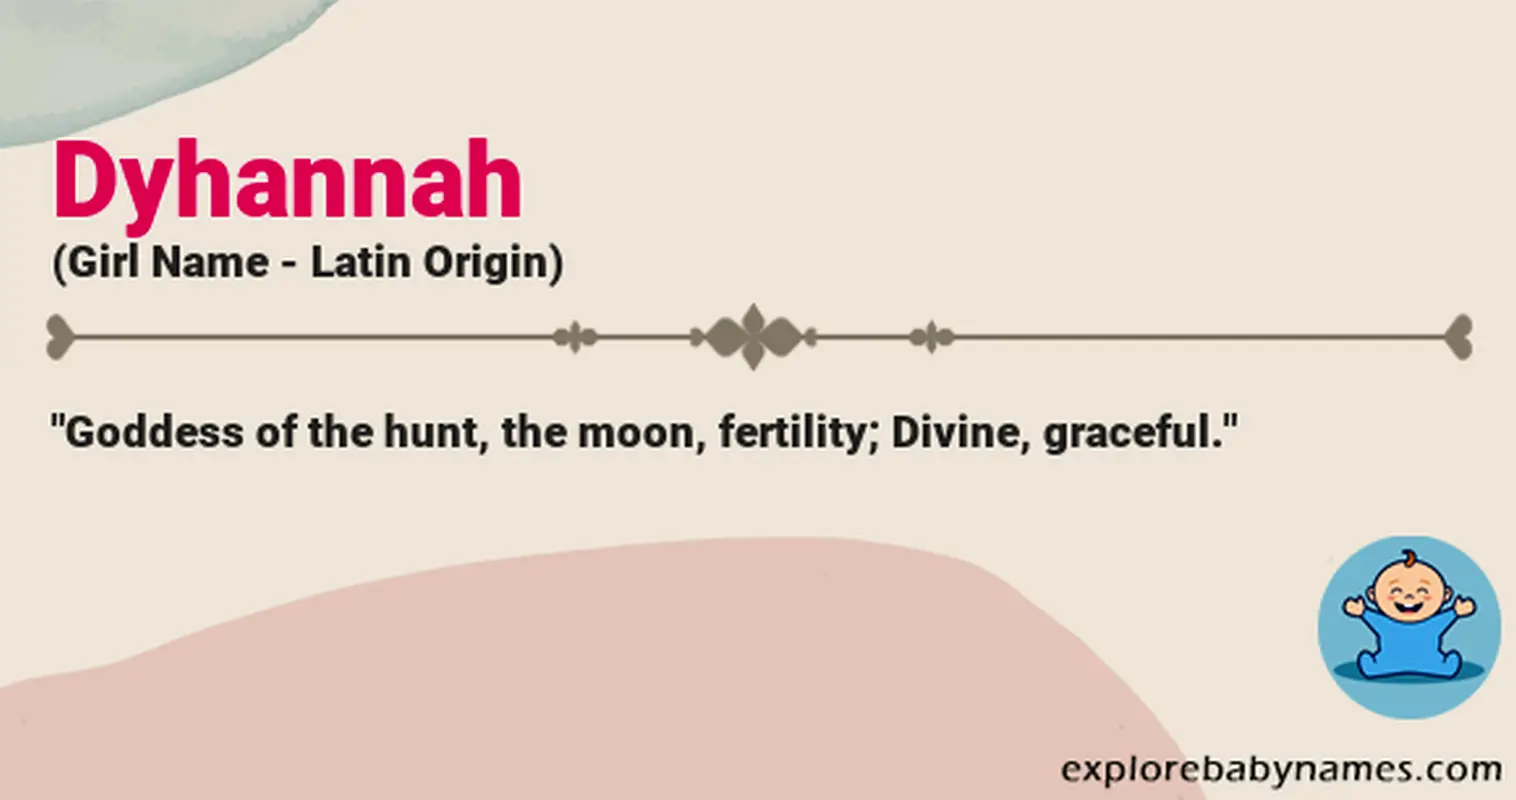 Meaning of Dyhannah